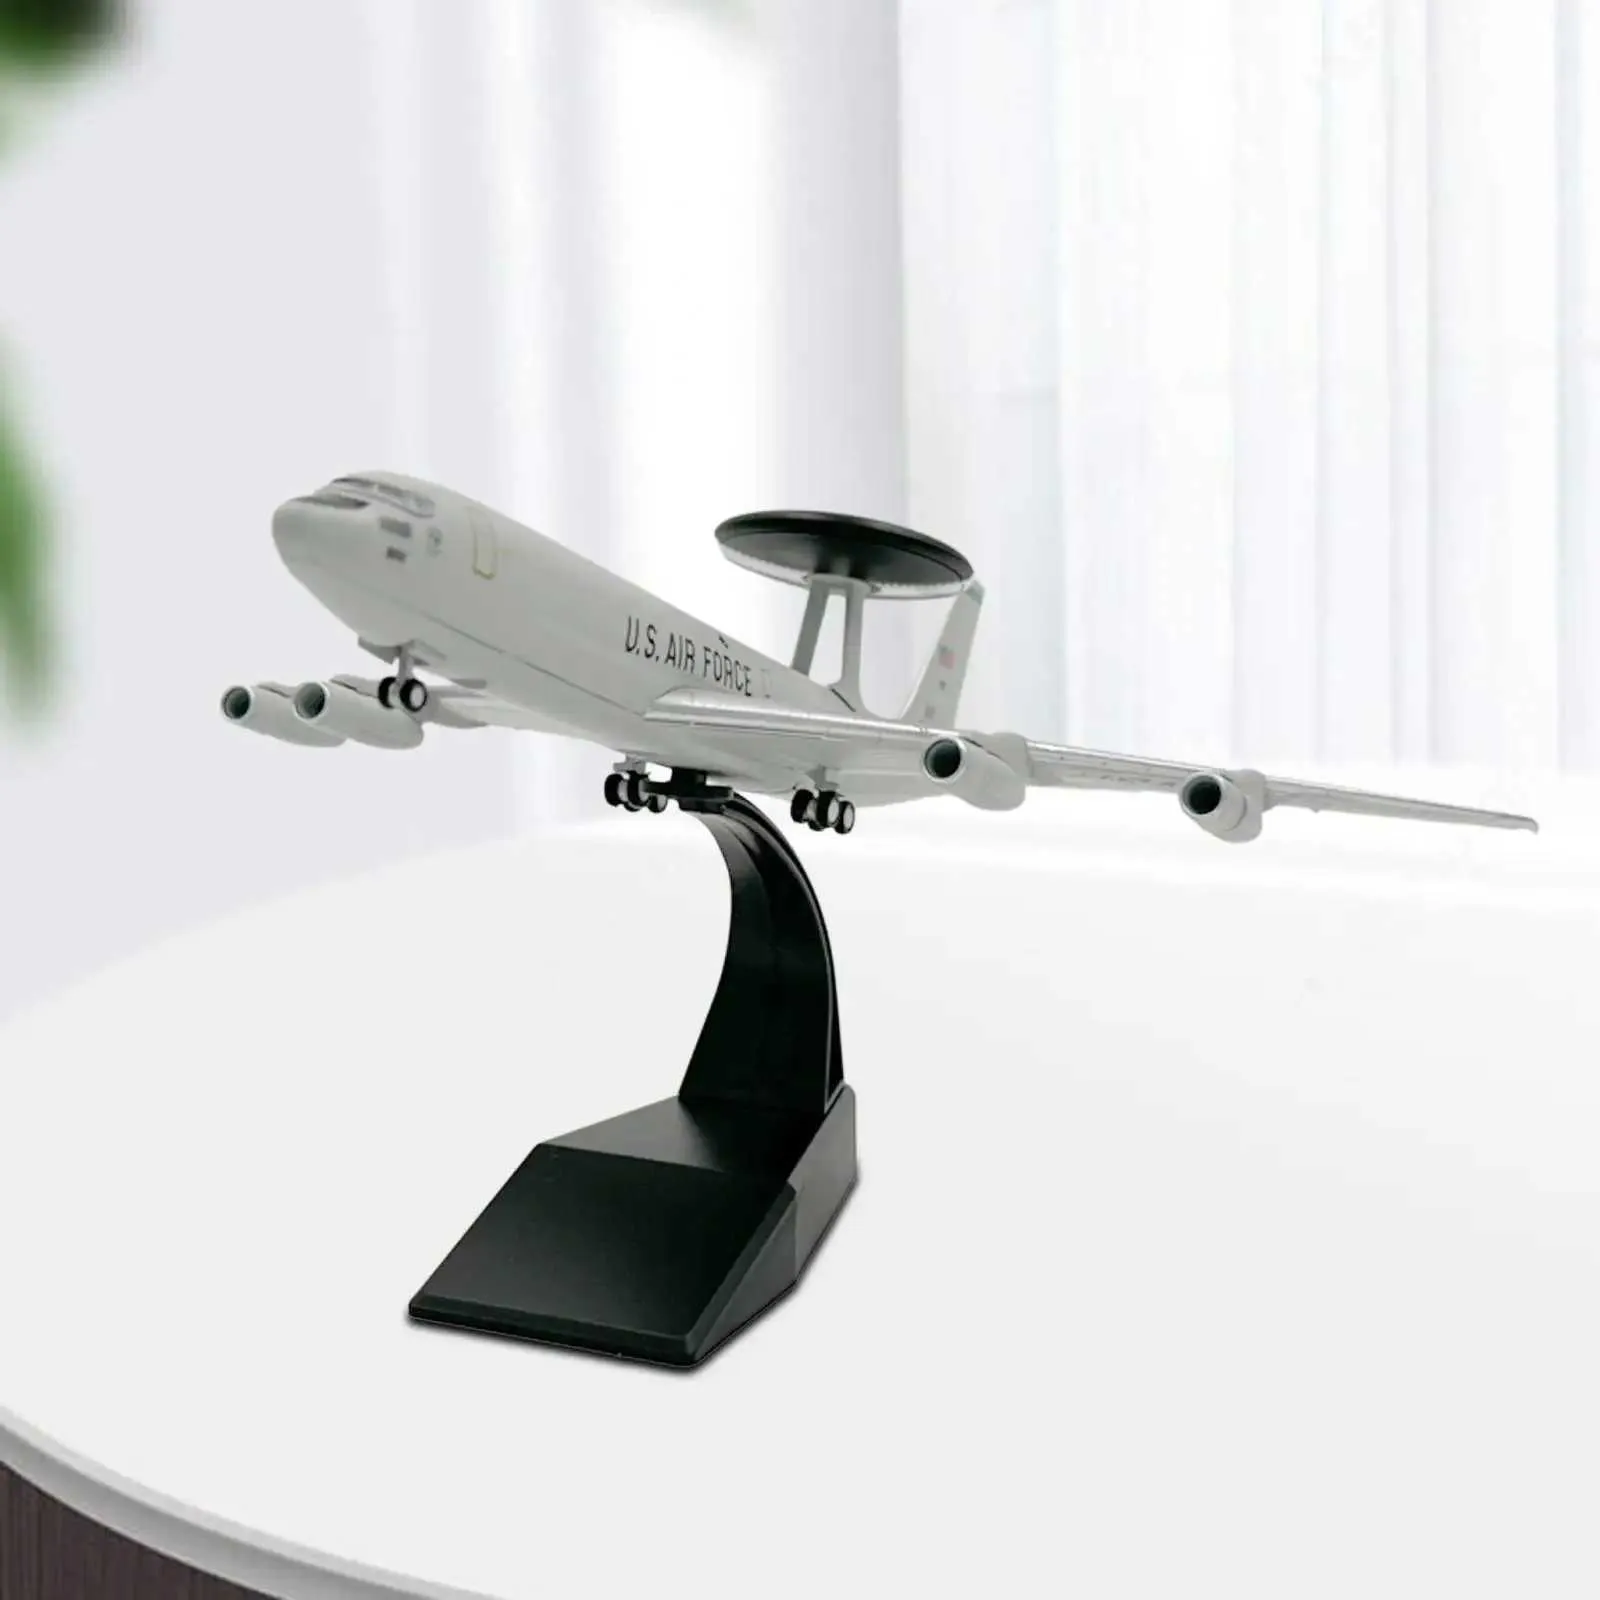 Diecast Model High Detailed 1/200 Scale USA E-3 Airplane Fighter Ornament for Bedroom, TV Cabinet Bookshelf Office Cafes